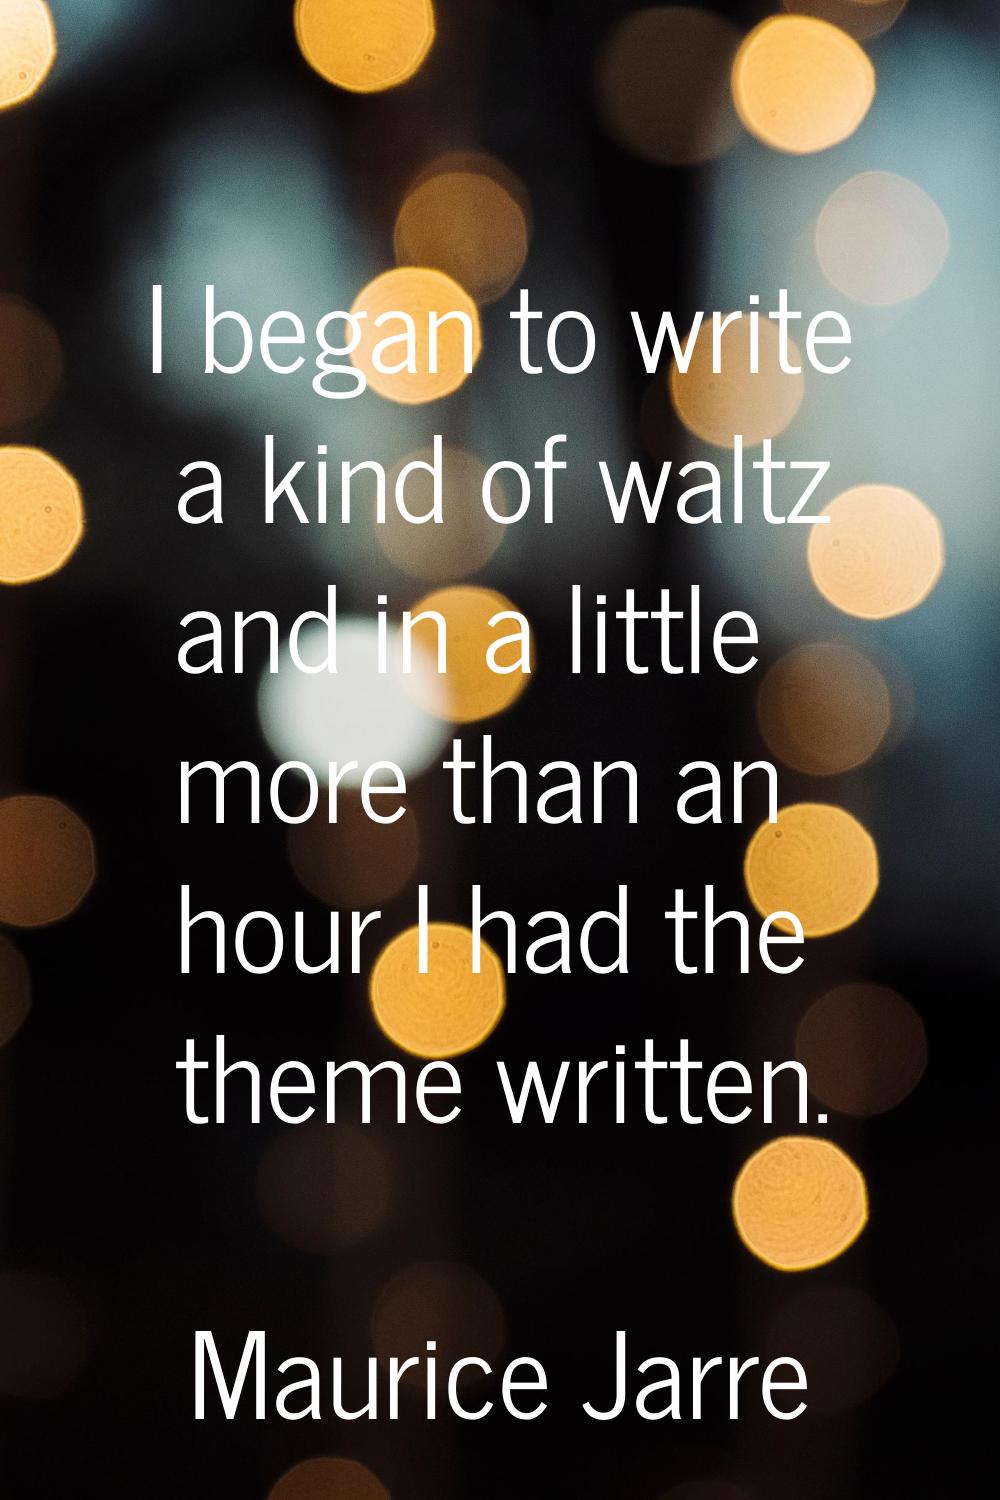 I began to write a kind of waltz and in a little more than an hour I had the theme written.